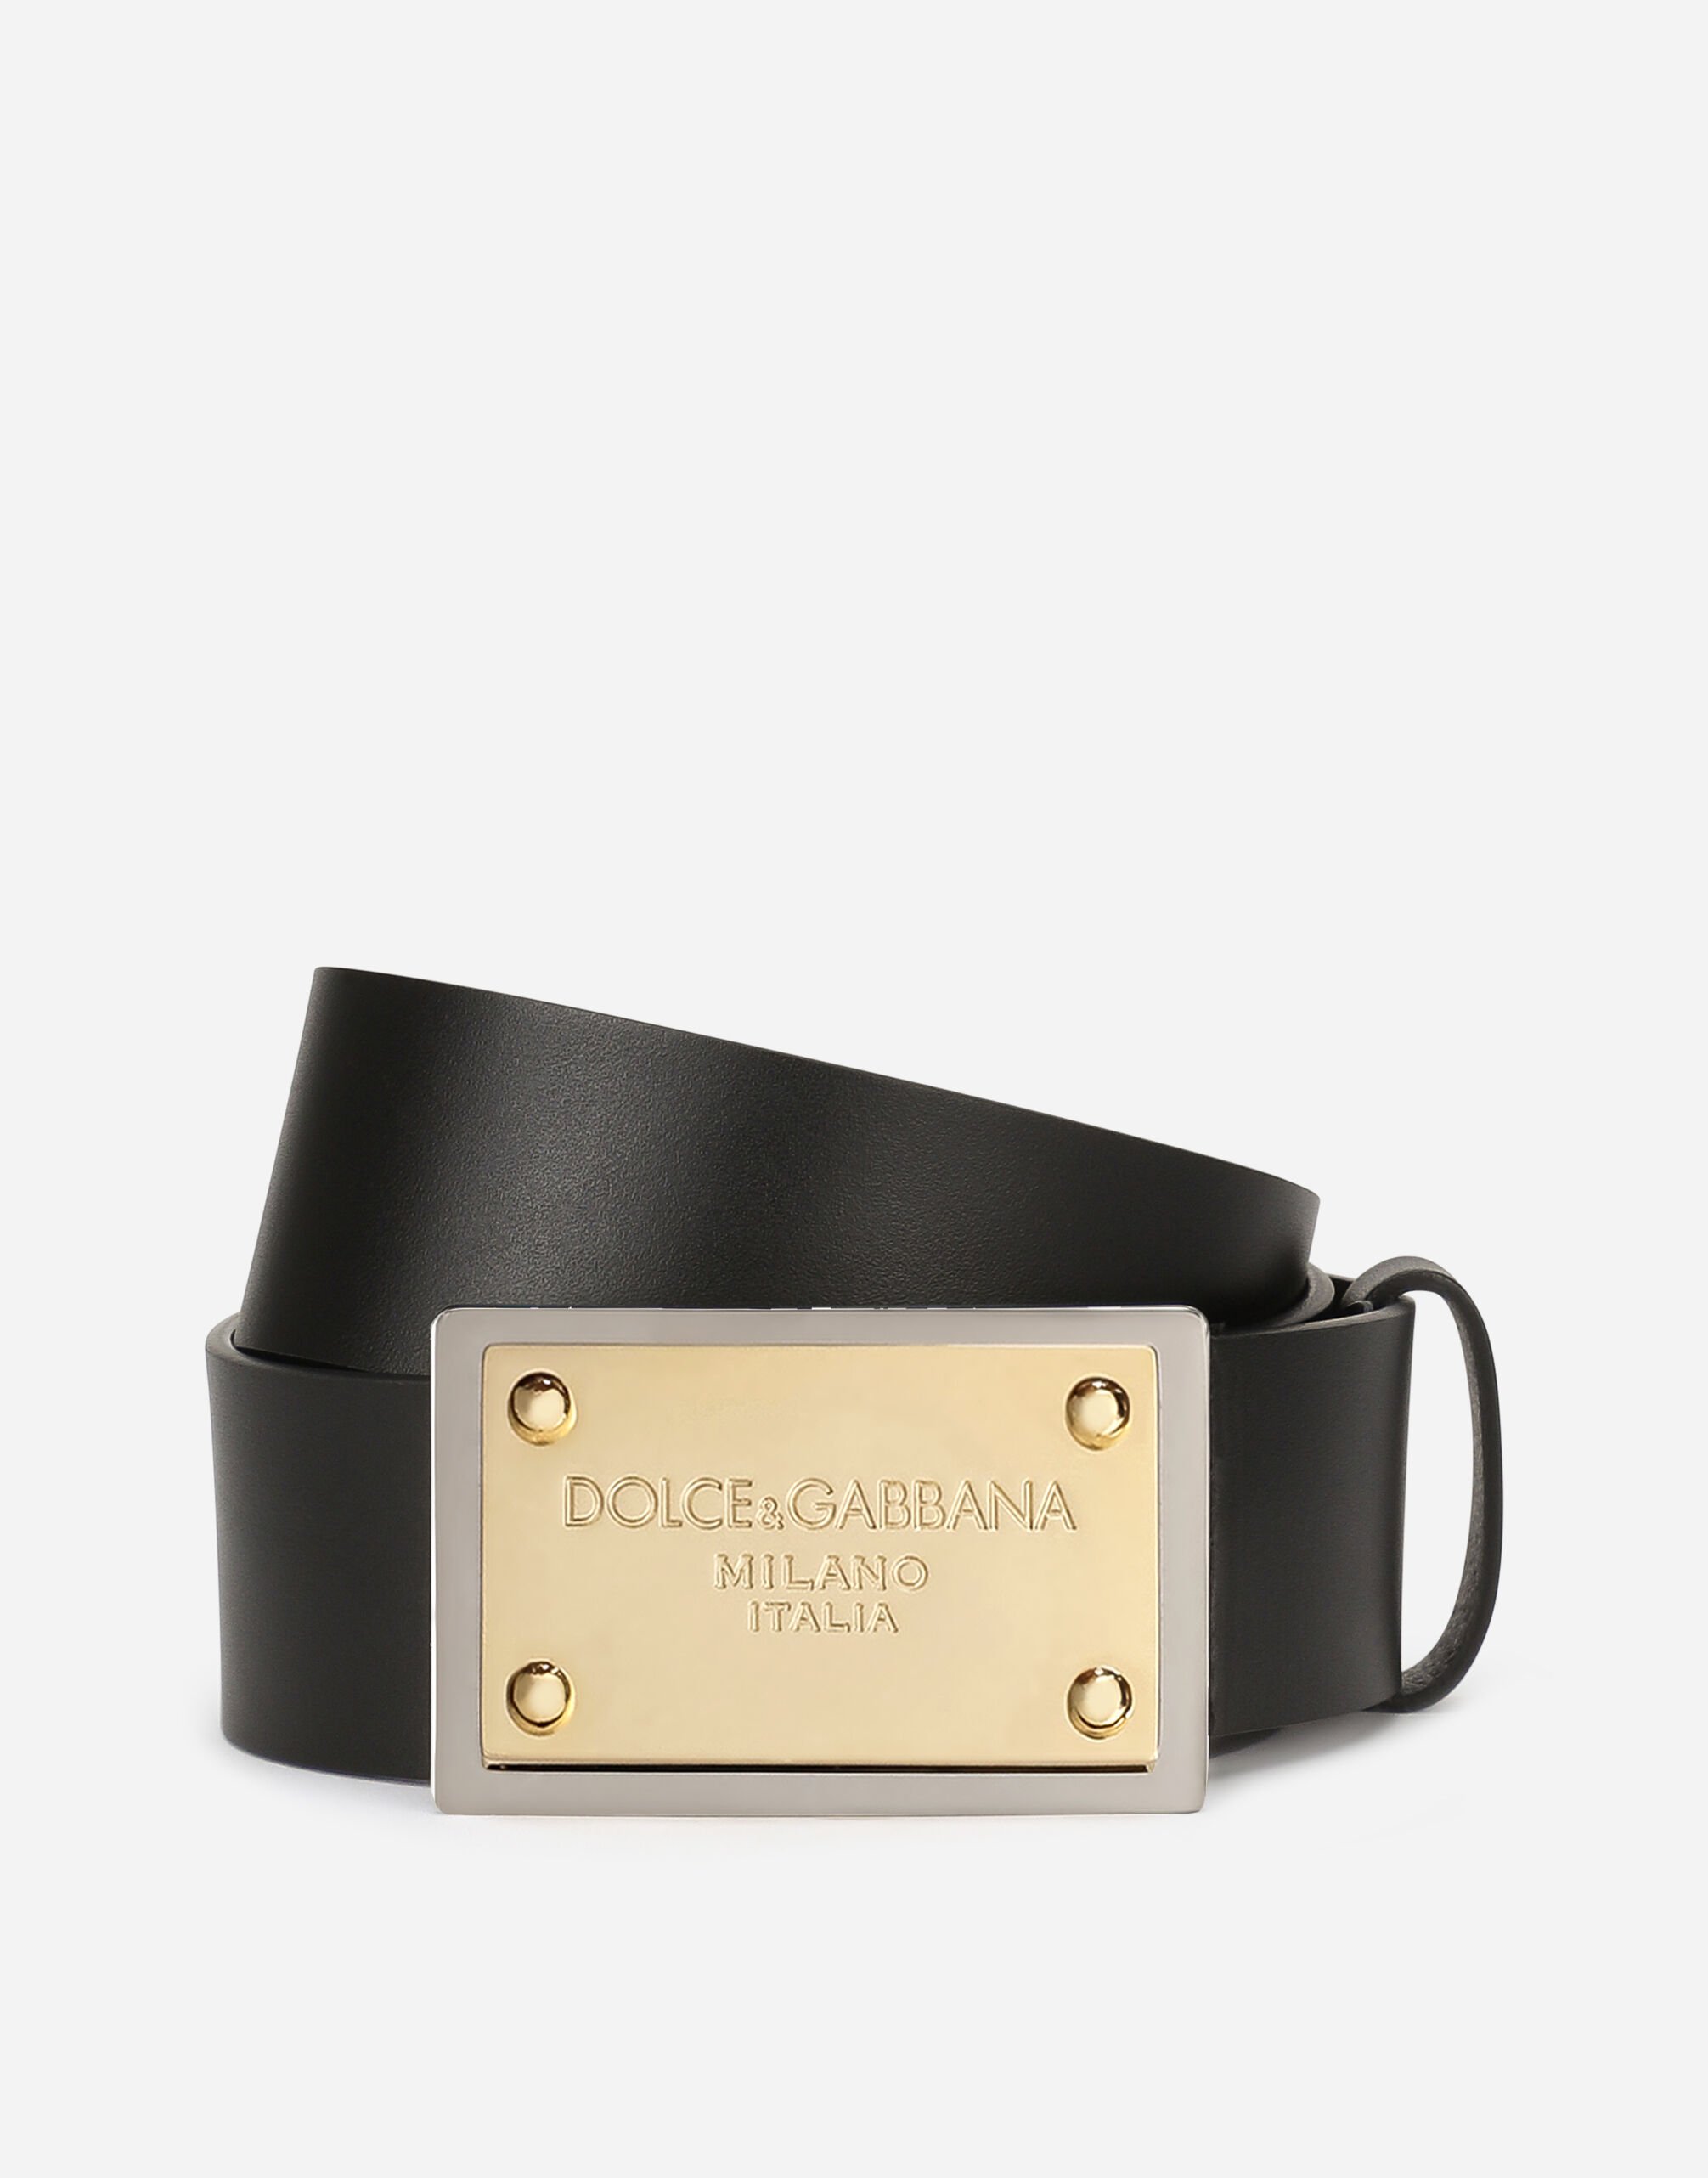 Dolce & Gabbana Lux leather belt with branded buckle Black VG440AVP187